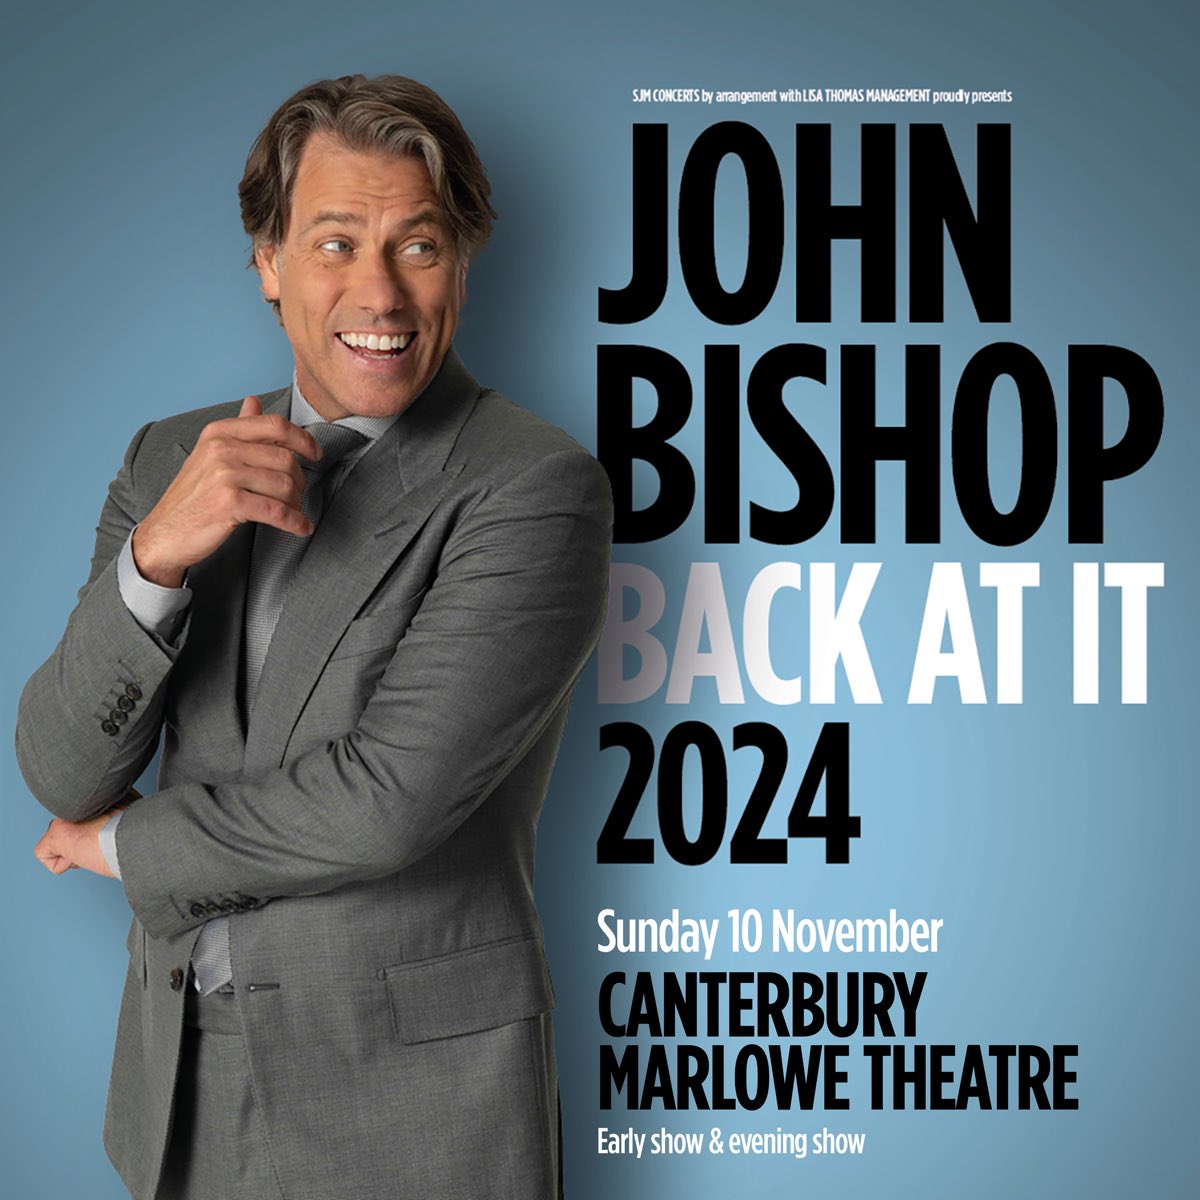 Extra date announced! Excited to share that my ‘Back At It’ tour is heading to the Canterbury Marlowe Theatre for TWO shows on November 10th, 2024! Tickets go on sale Tuesday, April 9th at 10am! Don’t miss out! #BackAtItTour 🎤🎟️